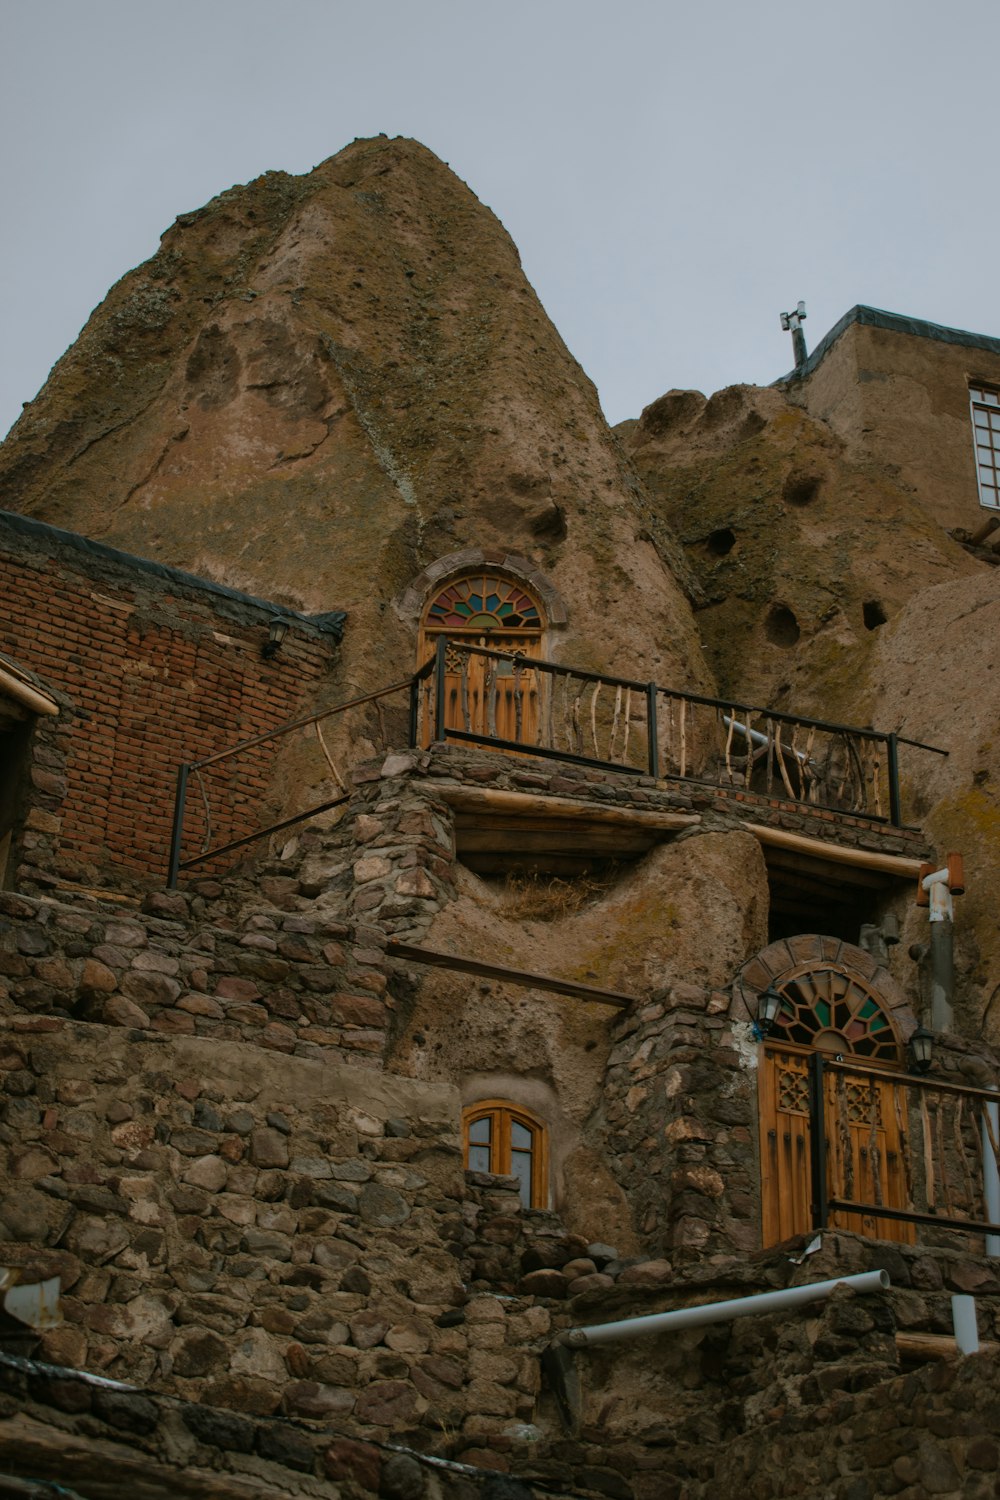 a building made of rocks with windows and balconies